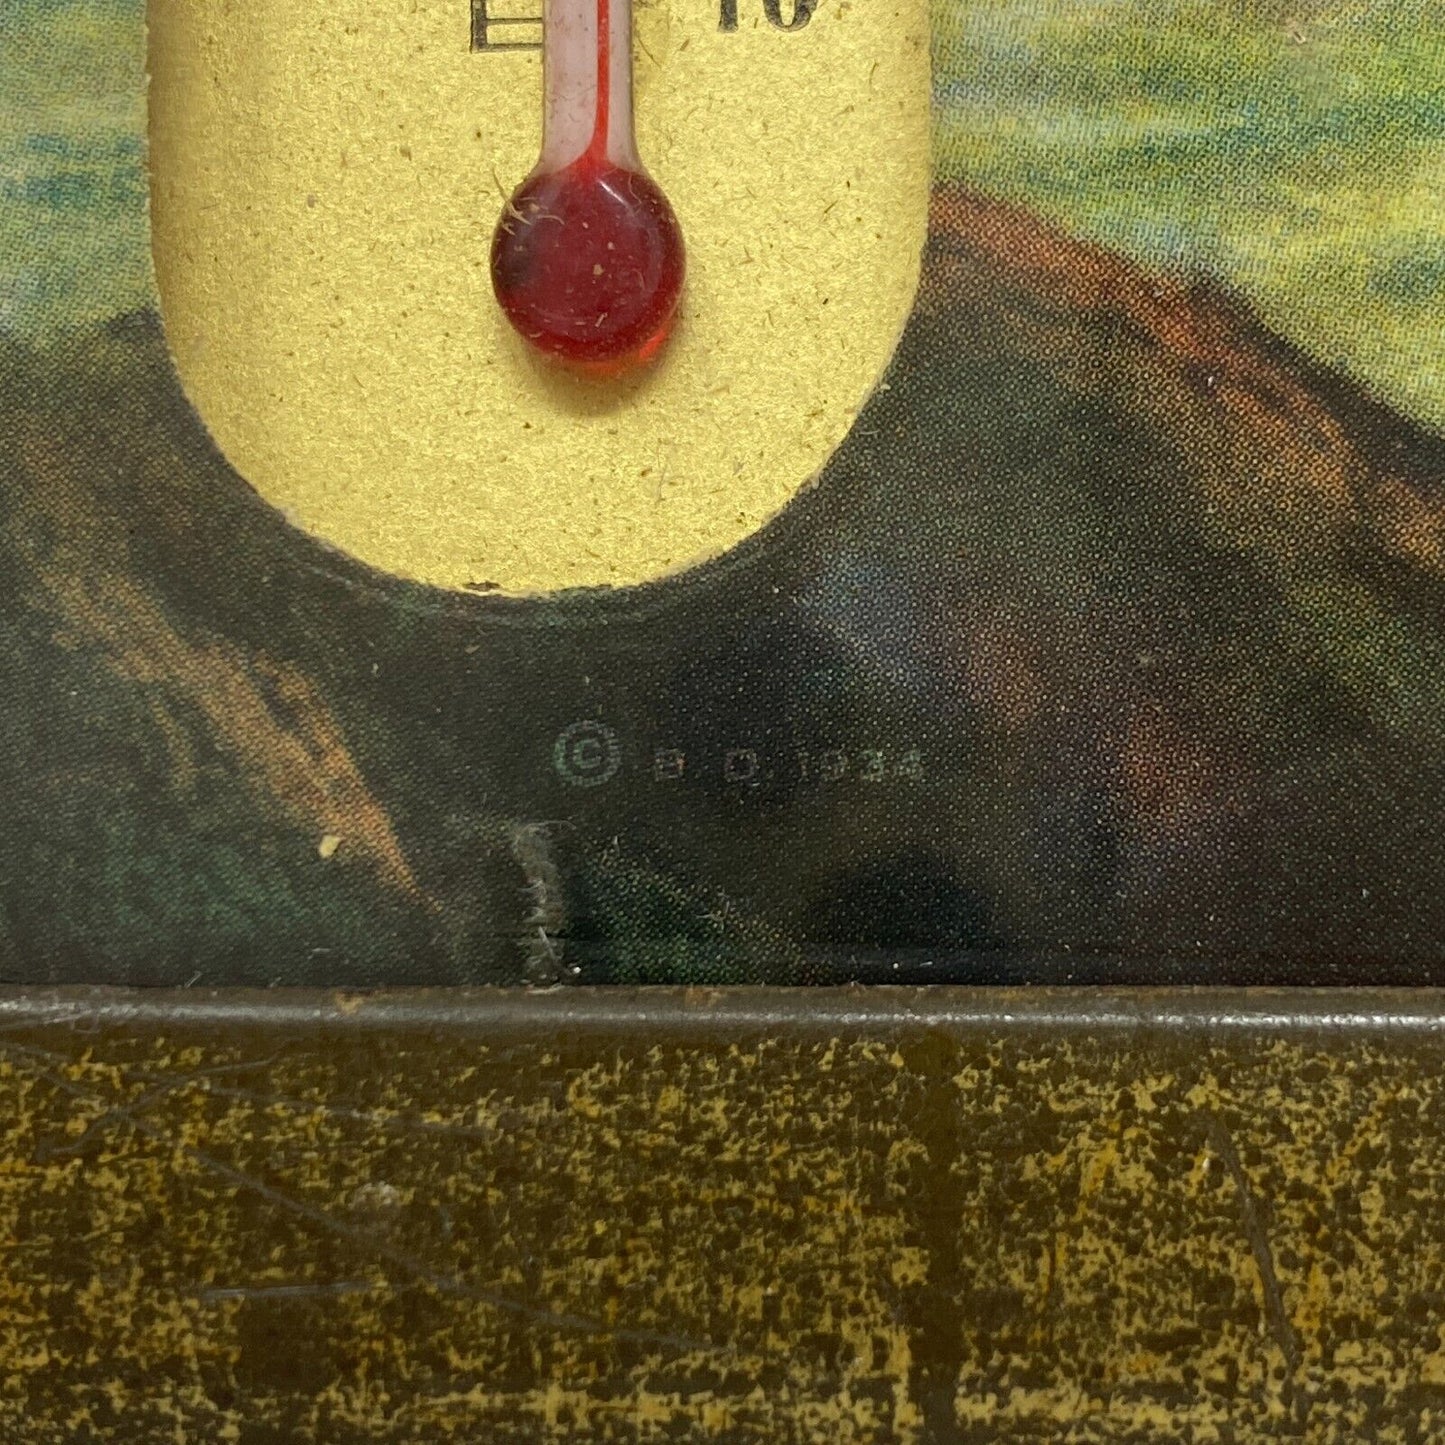 1934 Bell Motor Co. Chevrolet Maryland Lighthouse Thermometer